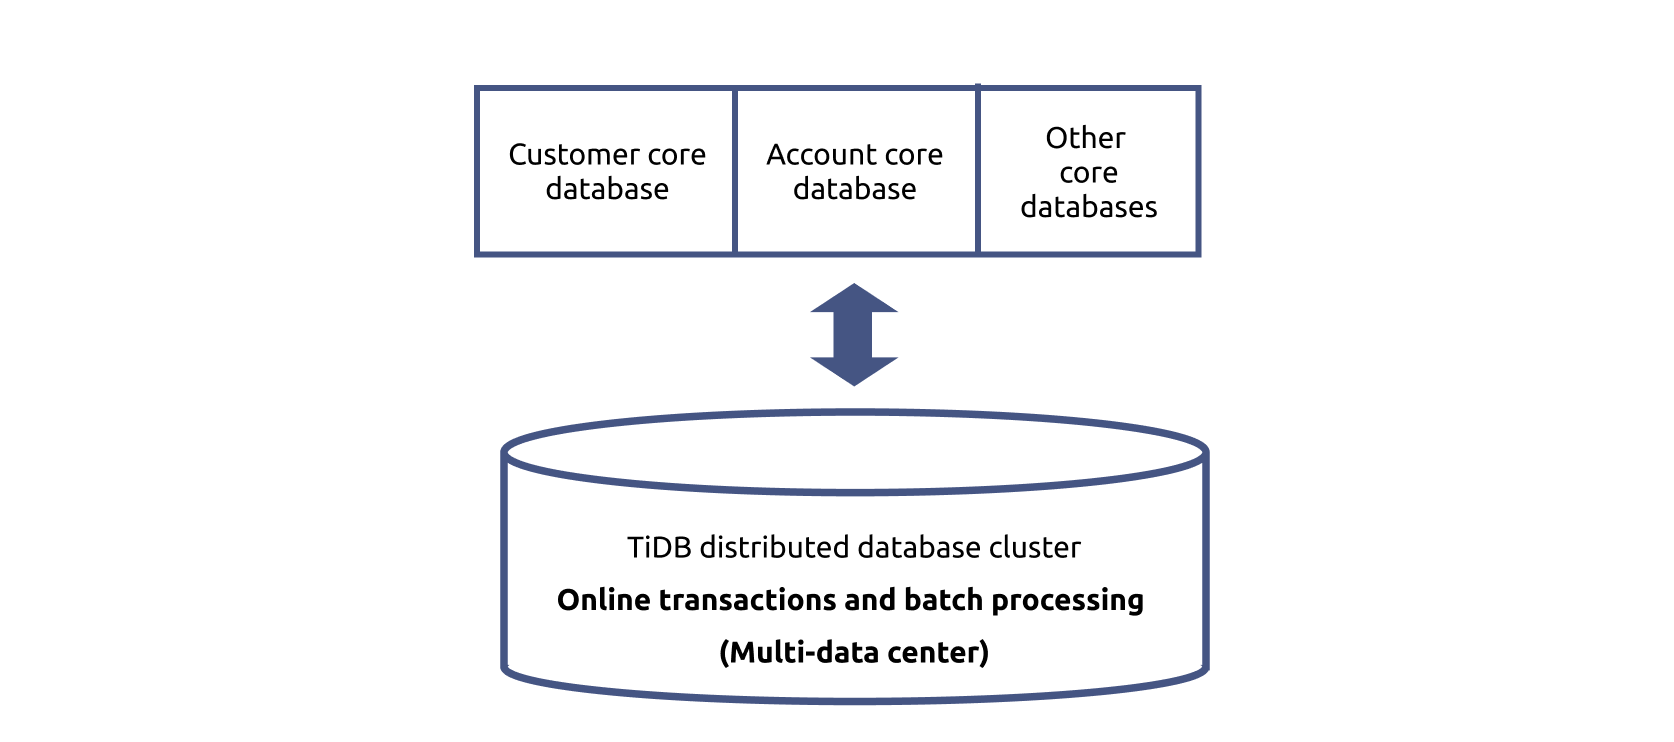 Use TiDB as the primary architecture